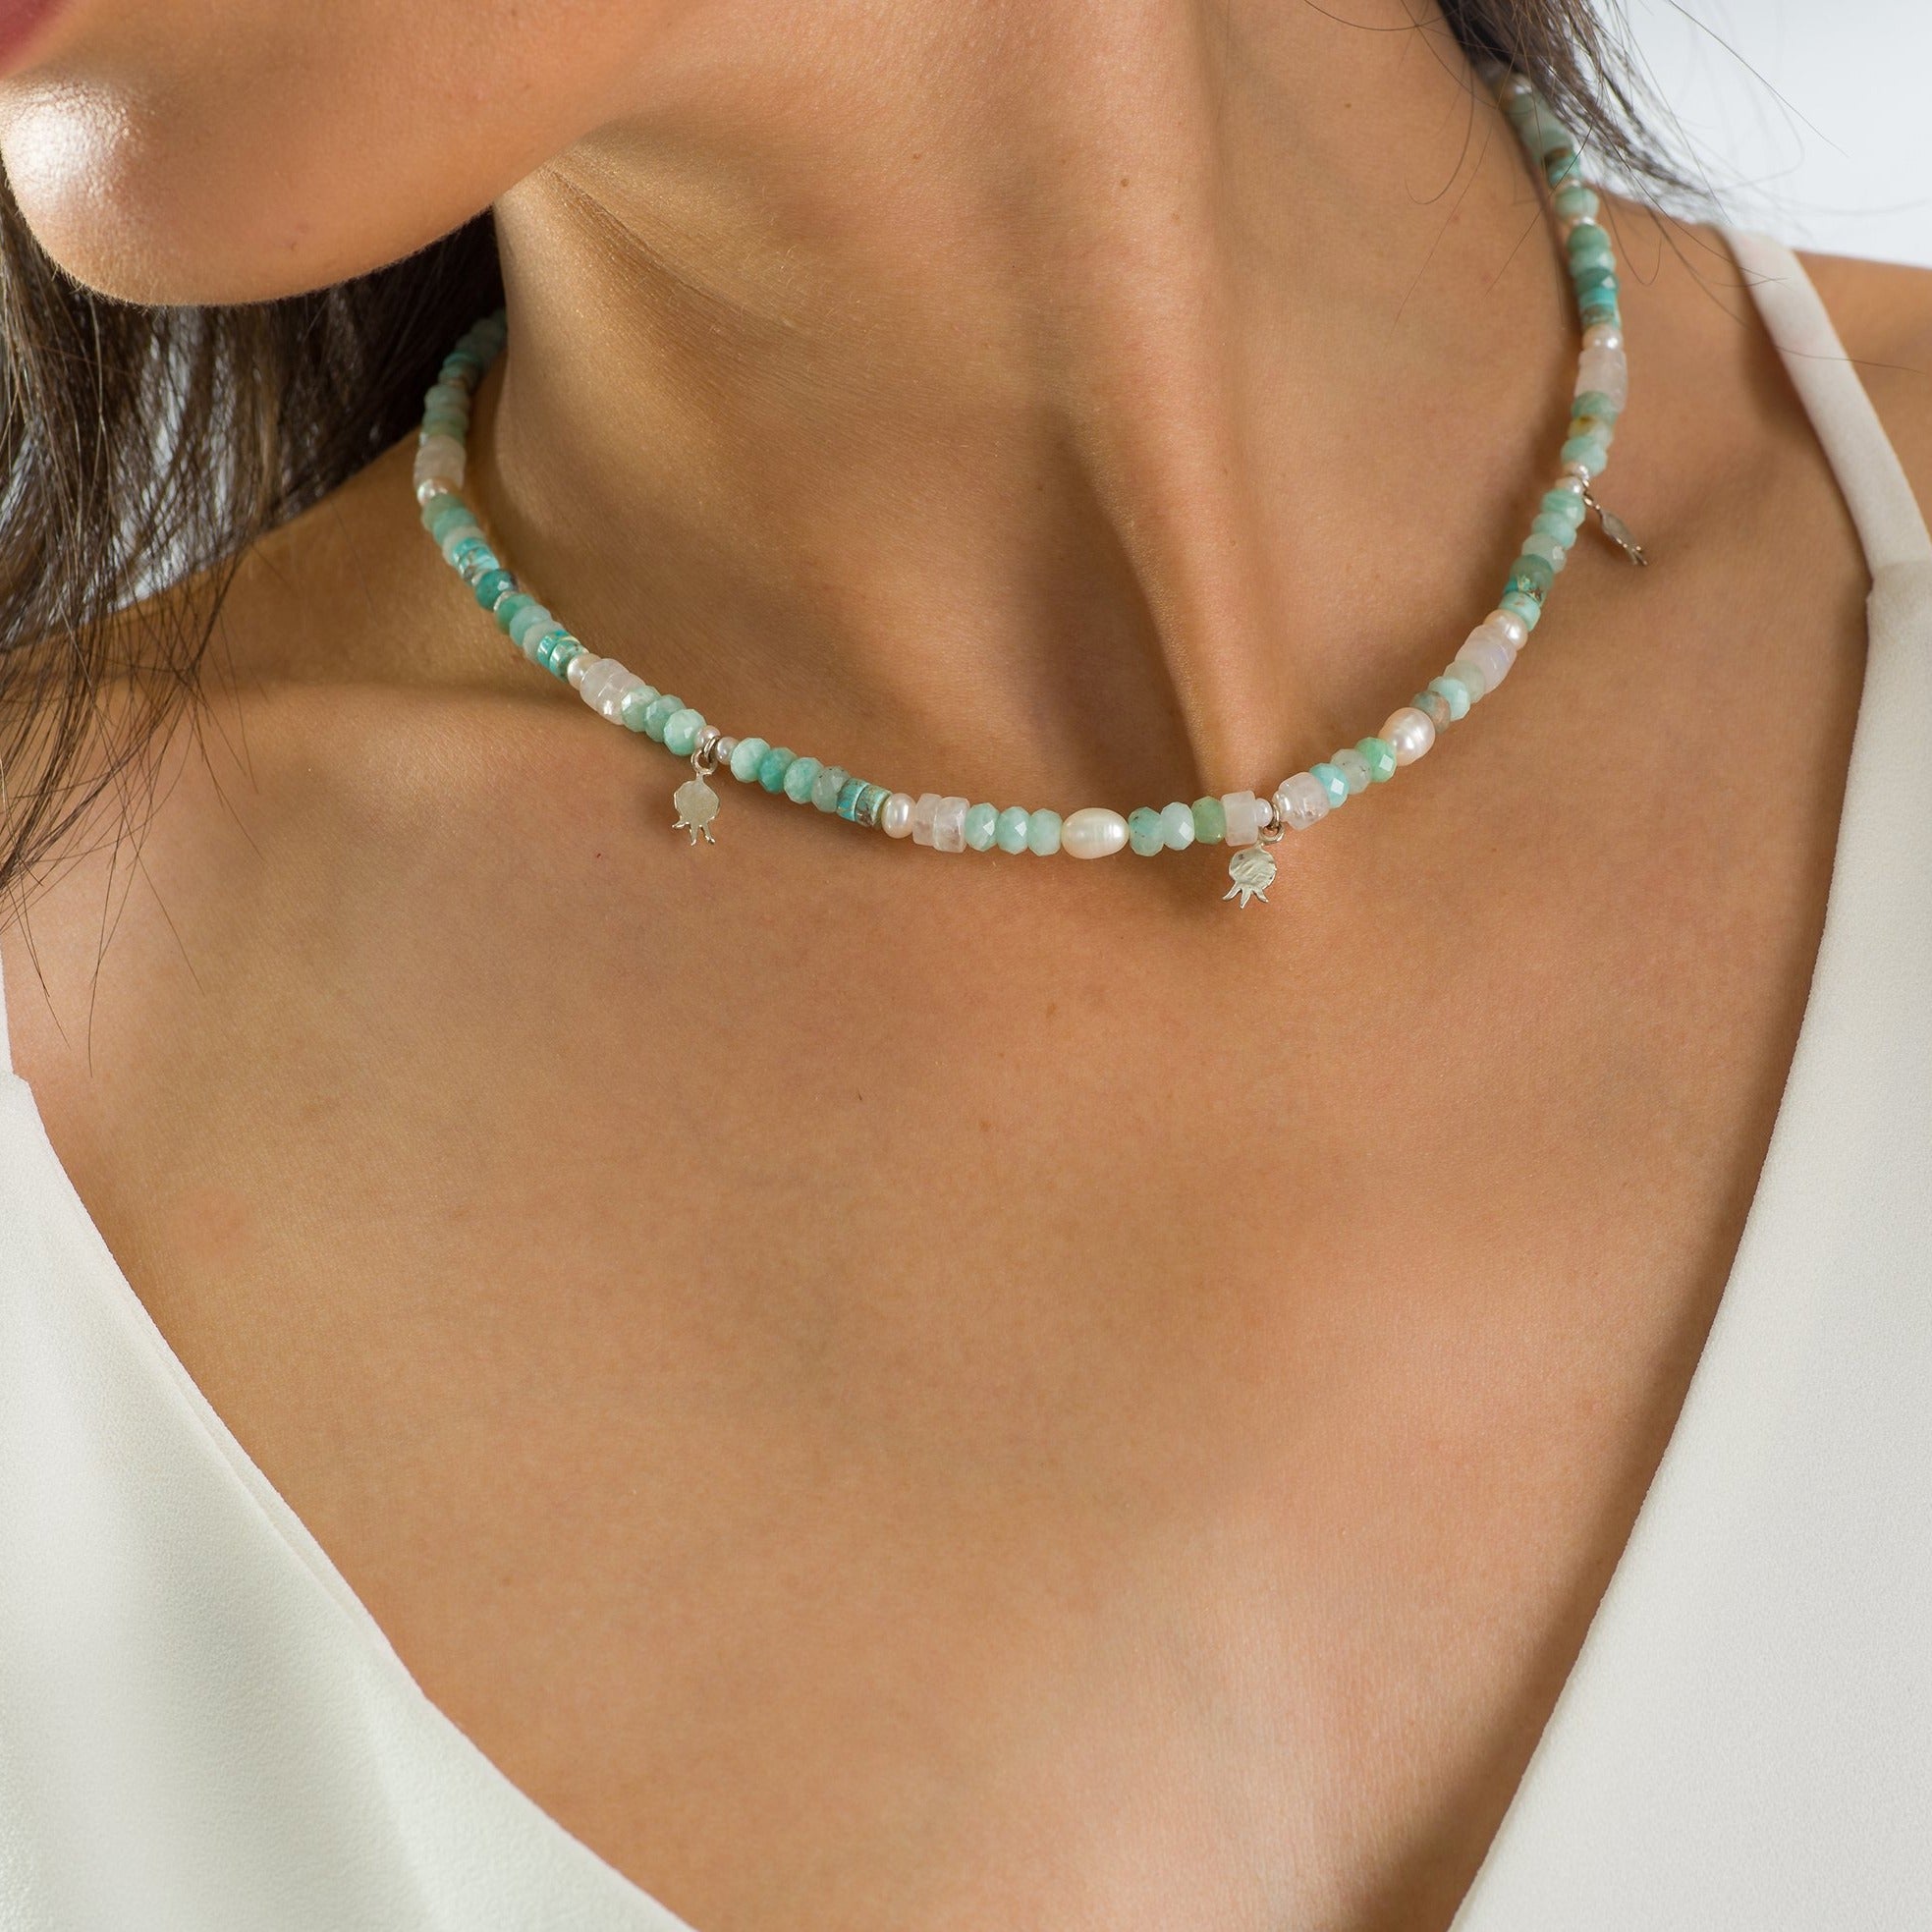 How to make a Simple Beaded Necklace -